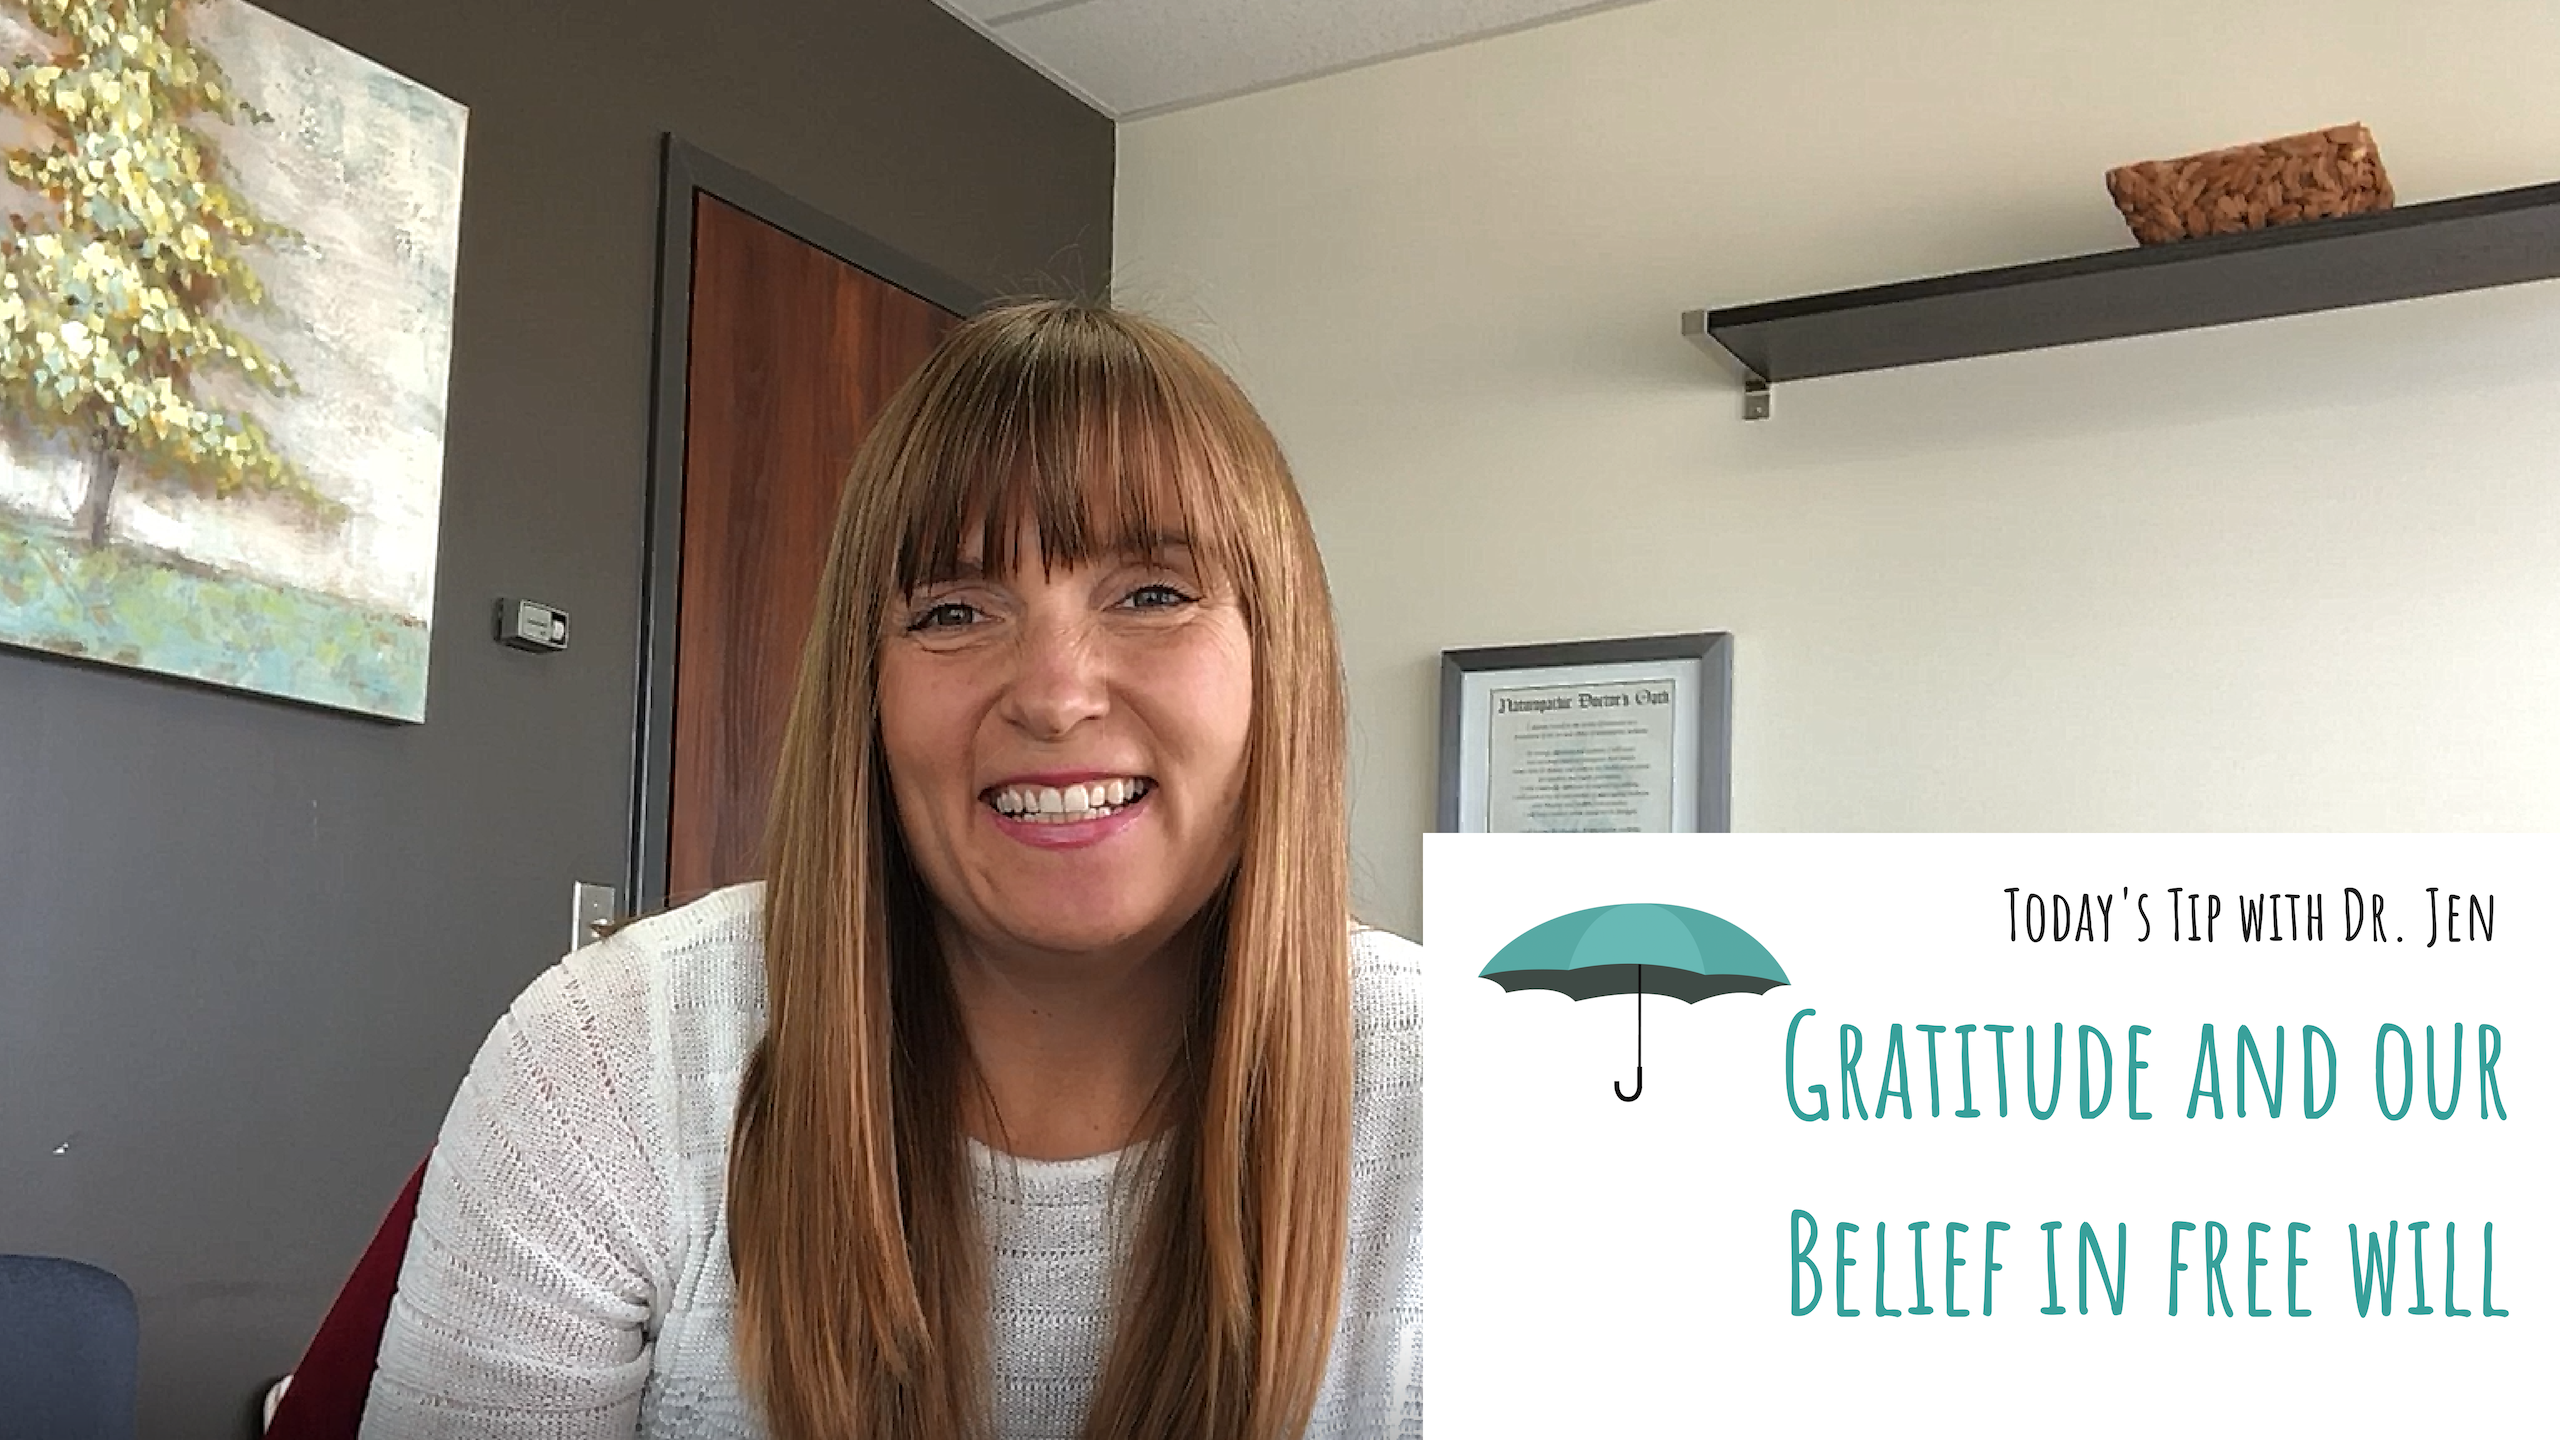 Today’s Tip with Dr. Jen: Gratitude and Our Belief in Free Will